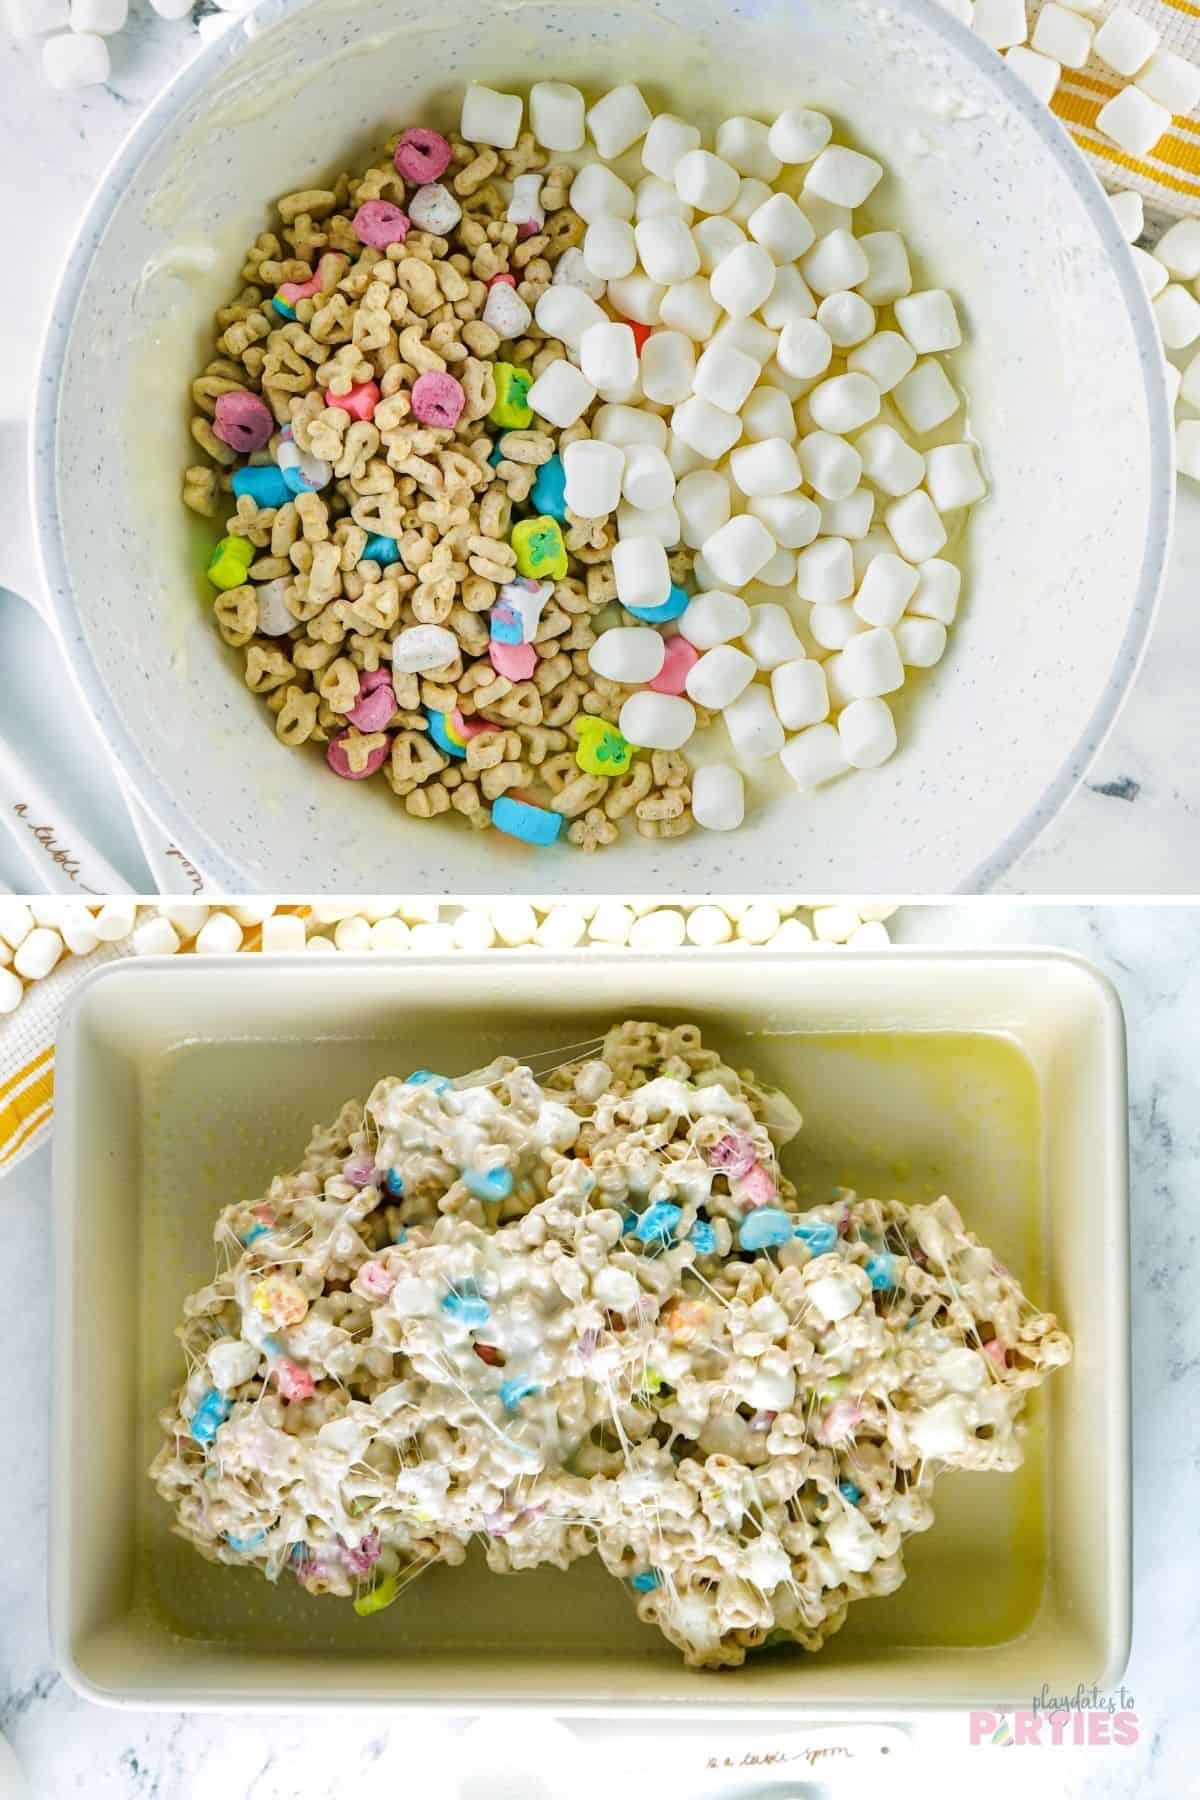 How to make Lucky Charms treats steps 3-4.